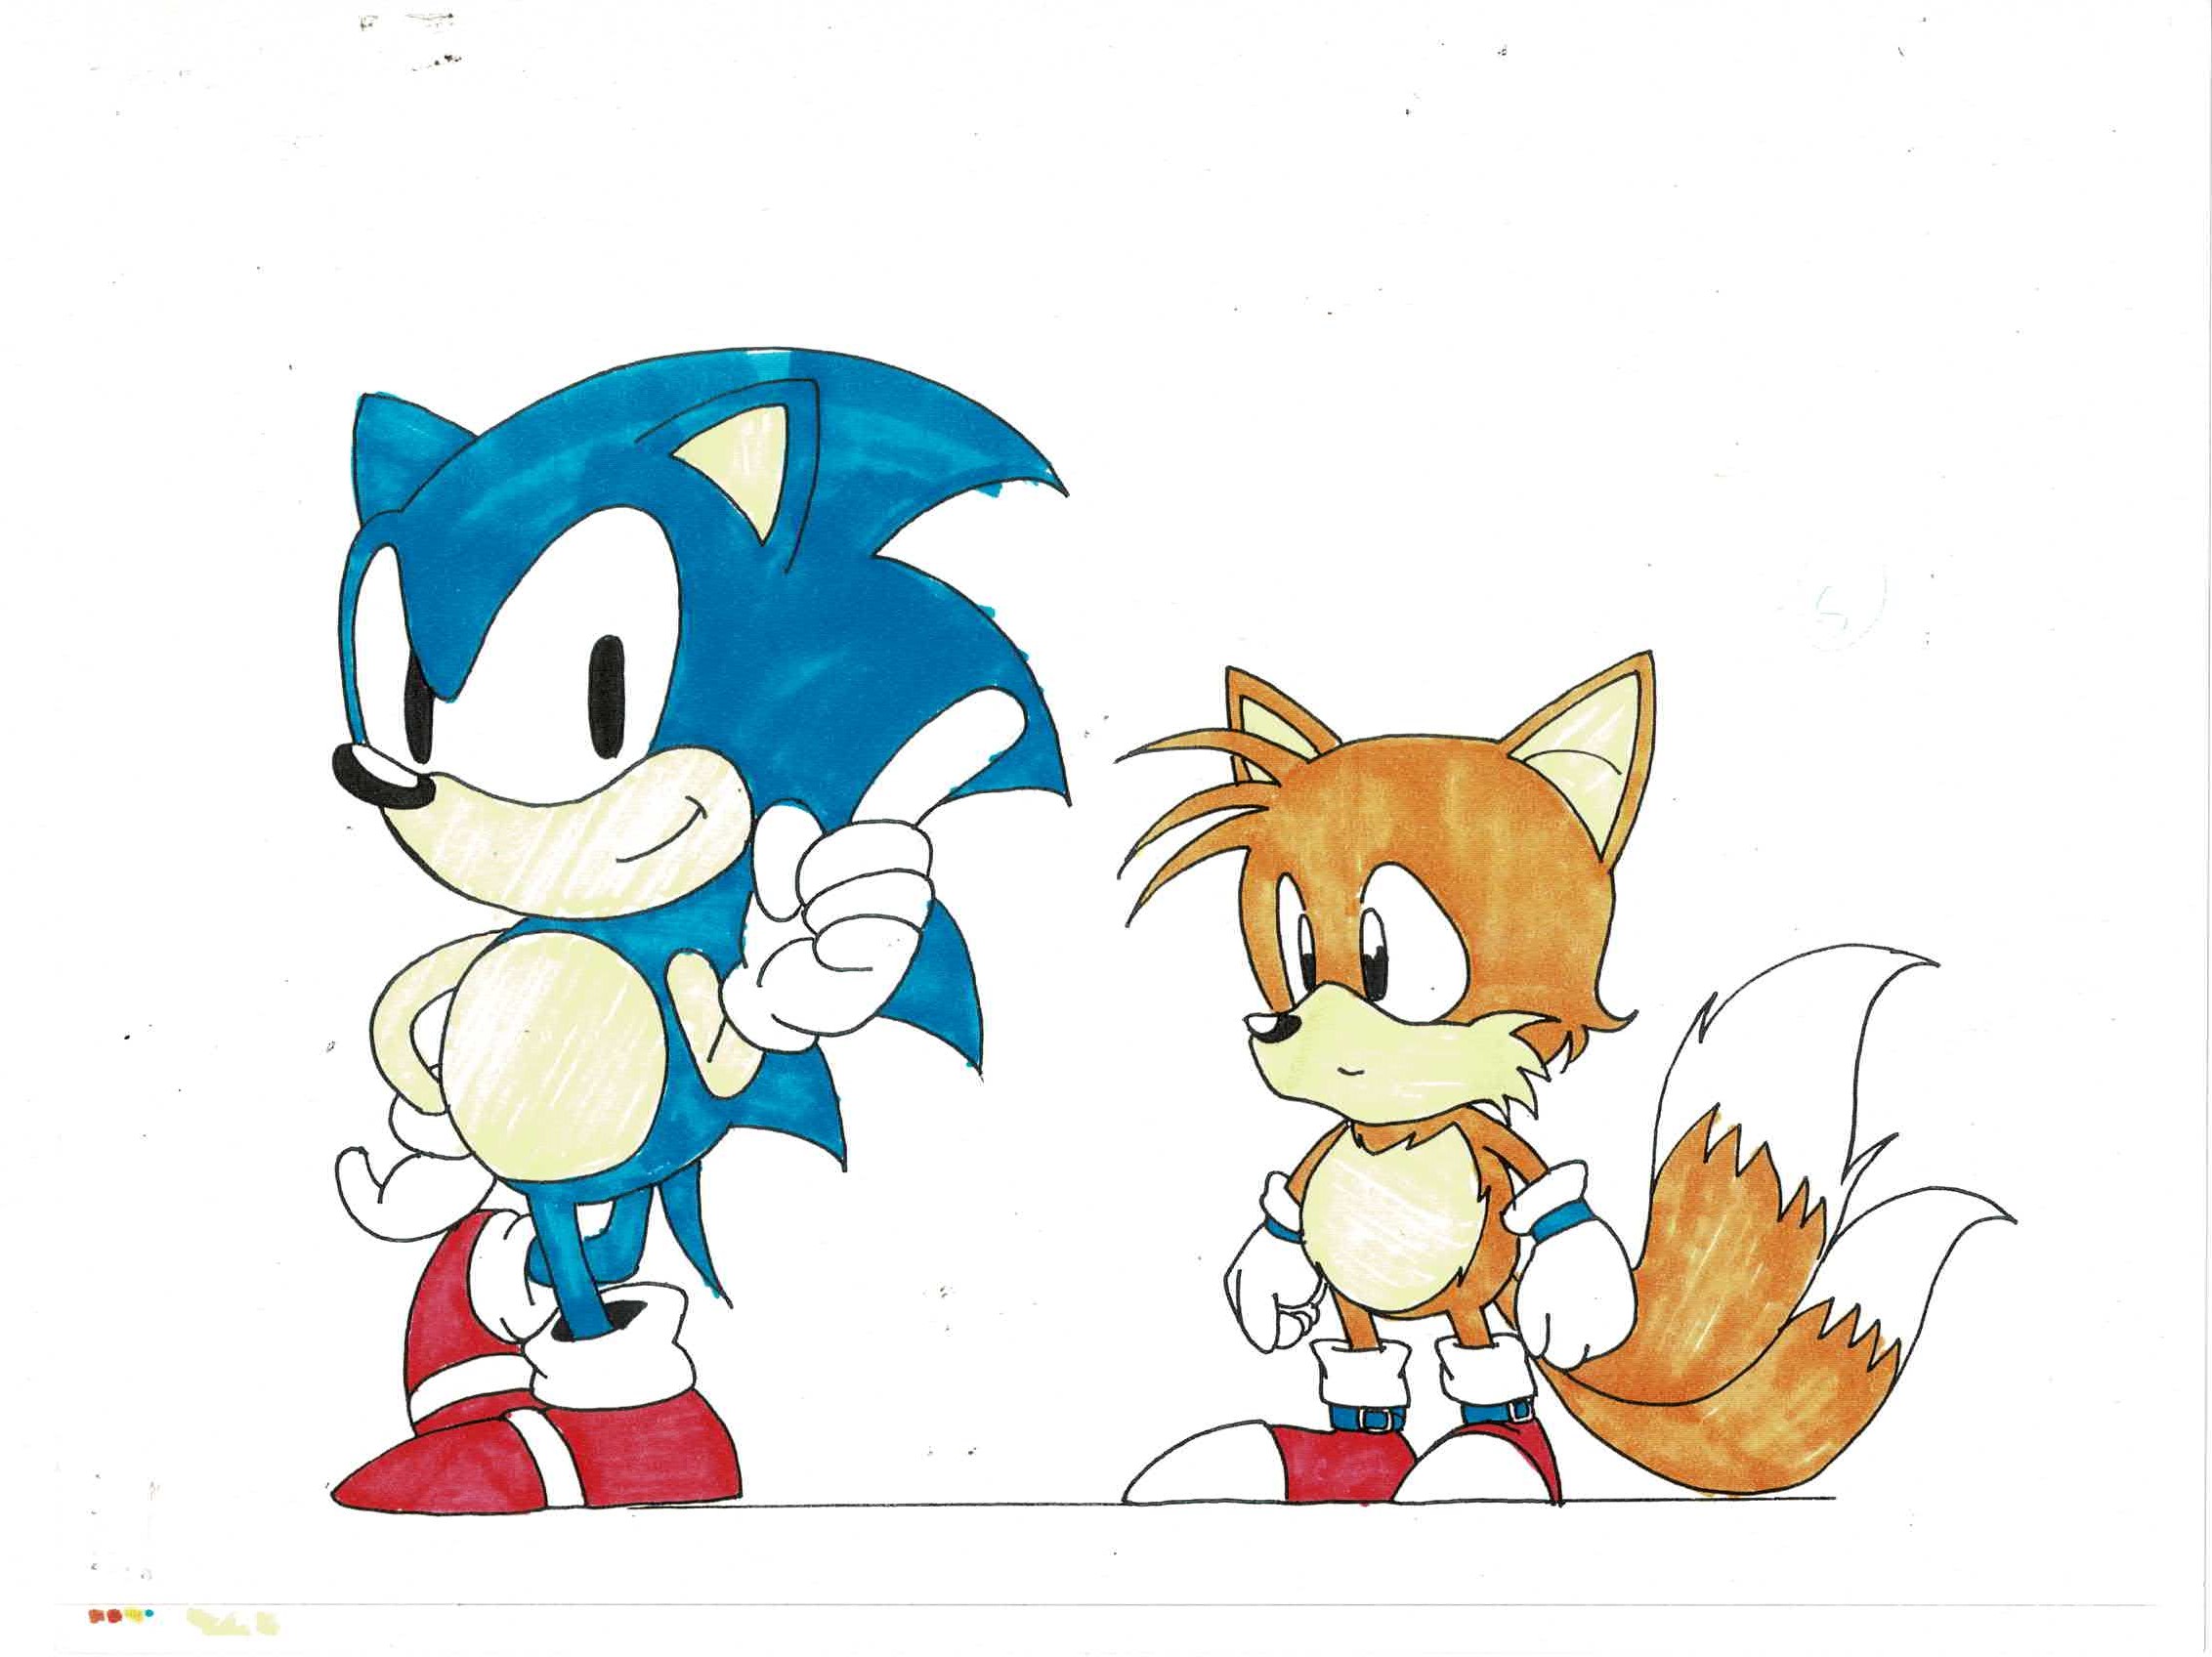 Early Tails Sprite Uncovered in 1990s SEGA/DiC Design Documents